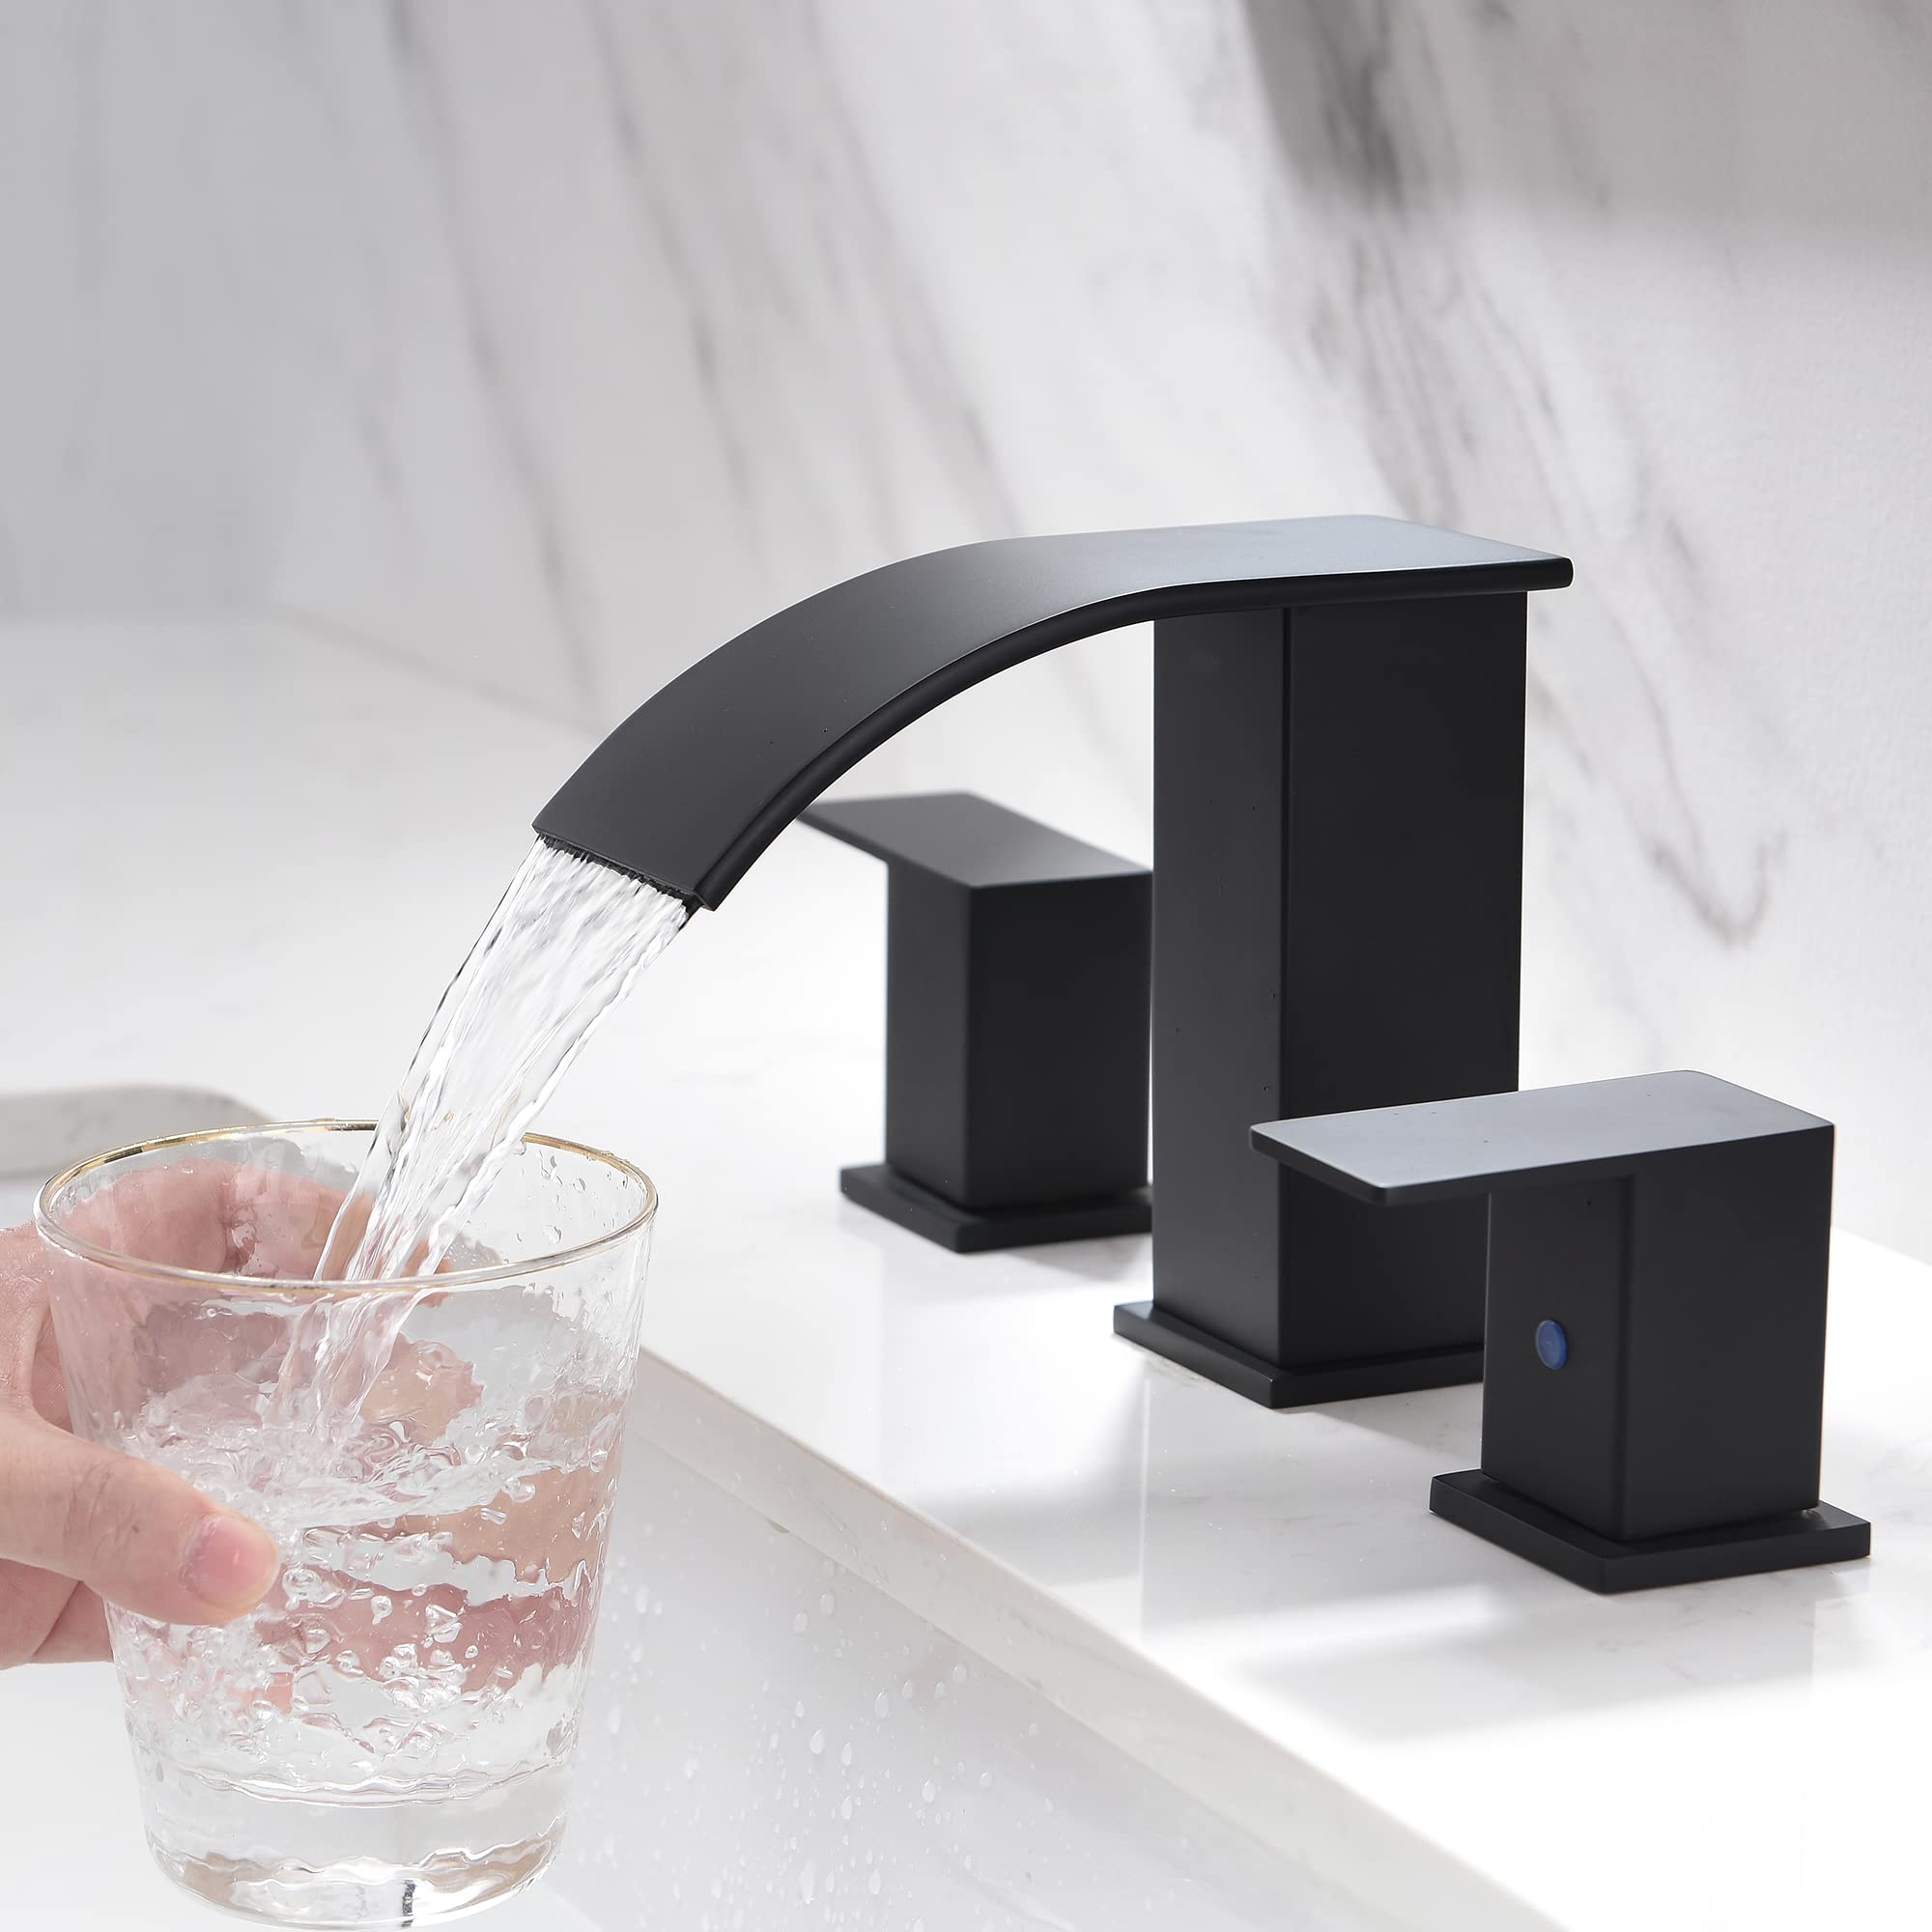 BRAVEBAR Black Waterfall Bathroom Faucet 3 Holes - 8Inch Widespread Bathroom Sink Faucet | Two Handles Lavatory Vanity Sink Faucets with Pop-up Drain Assembly & Supply Lines Matte Black